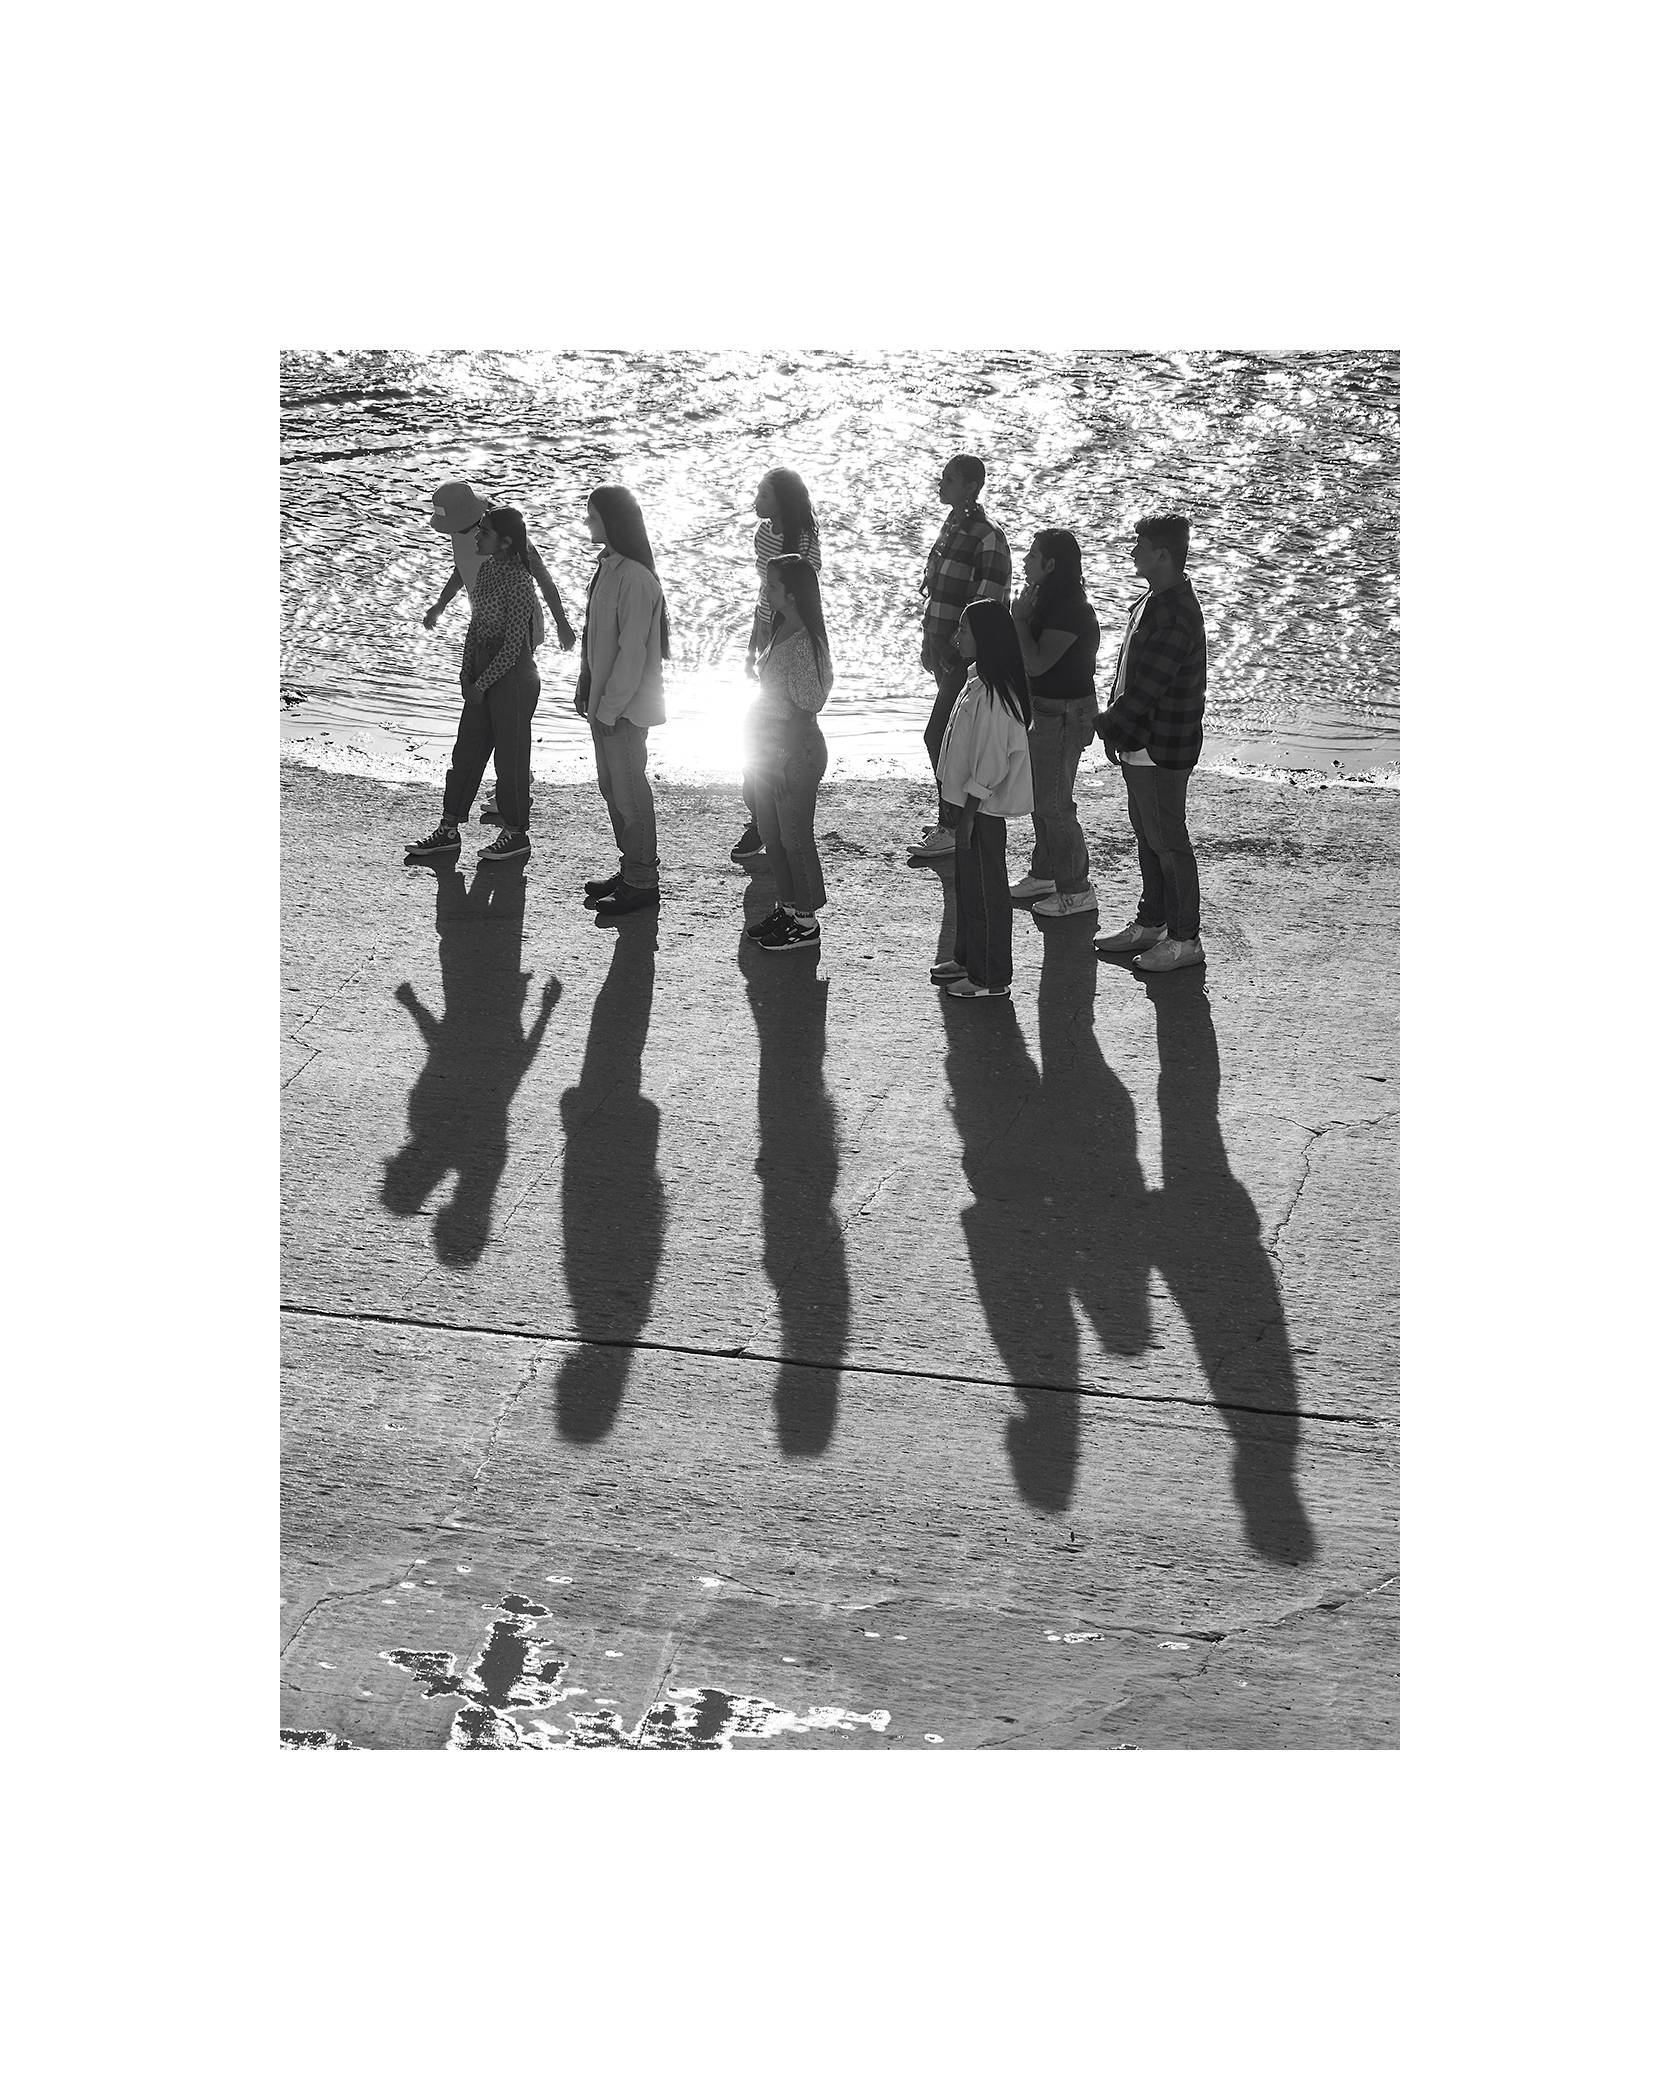 A black and white photo of people standing on the beach